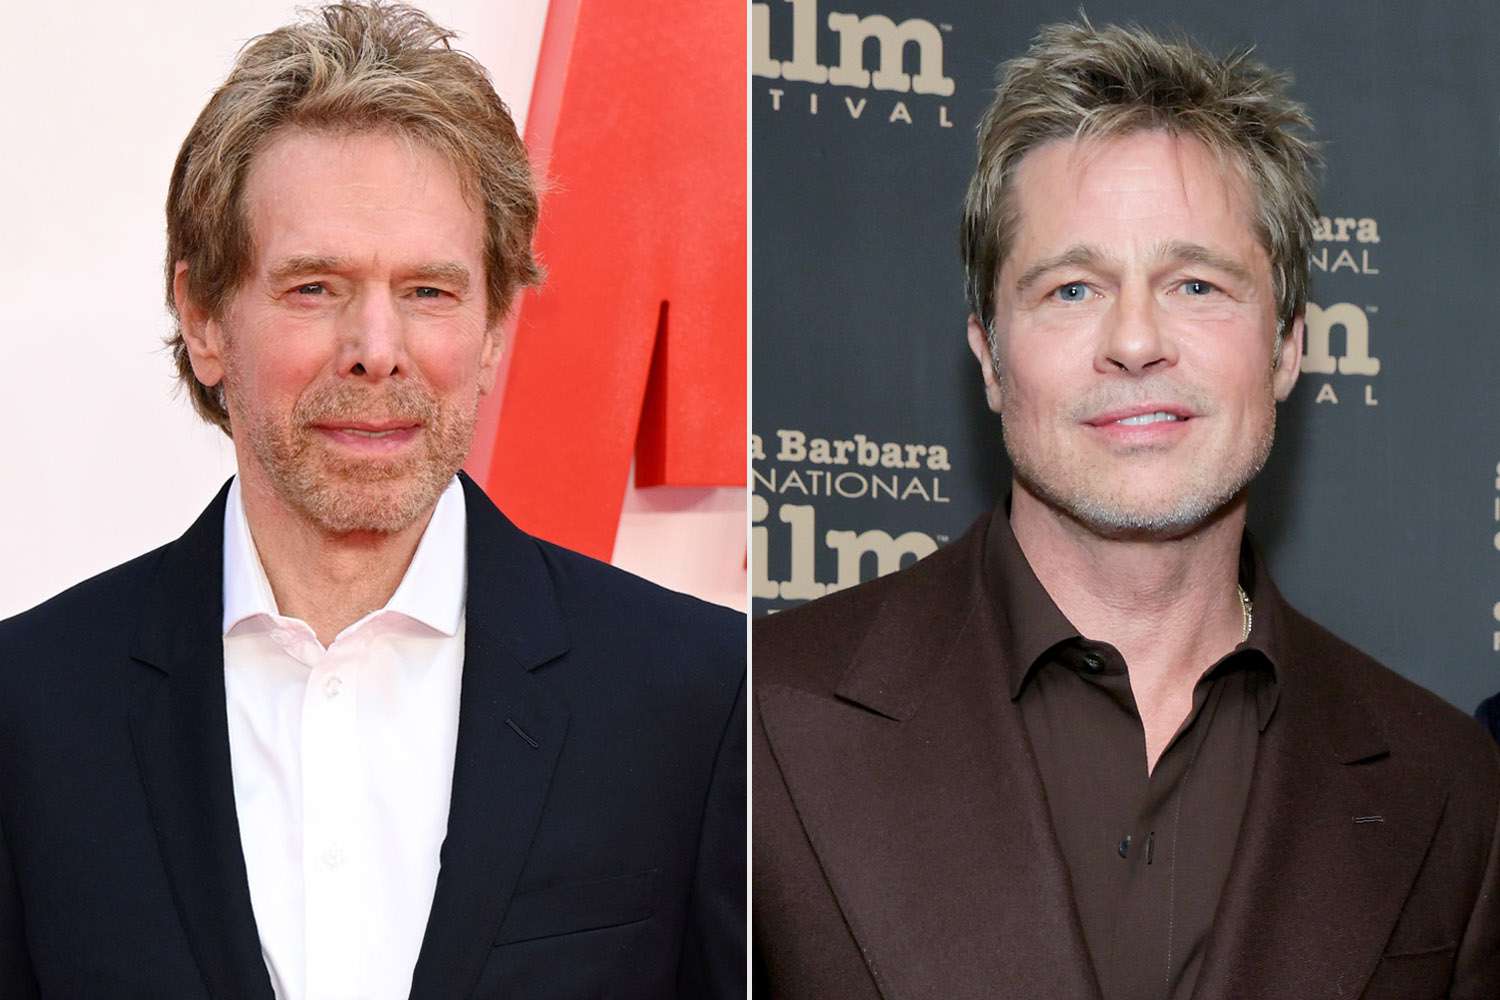 ...’ to Drive an F1 Car in New Movie, Says Jerry Bruckheimer: ‘He’s Amazing in That Car’ (Exclusive)